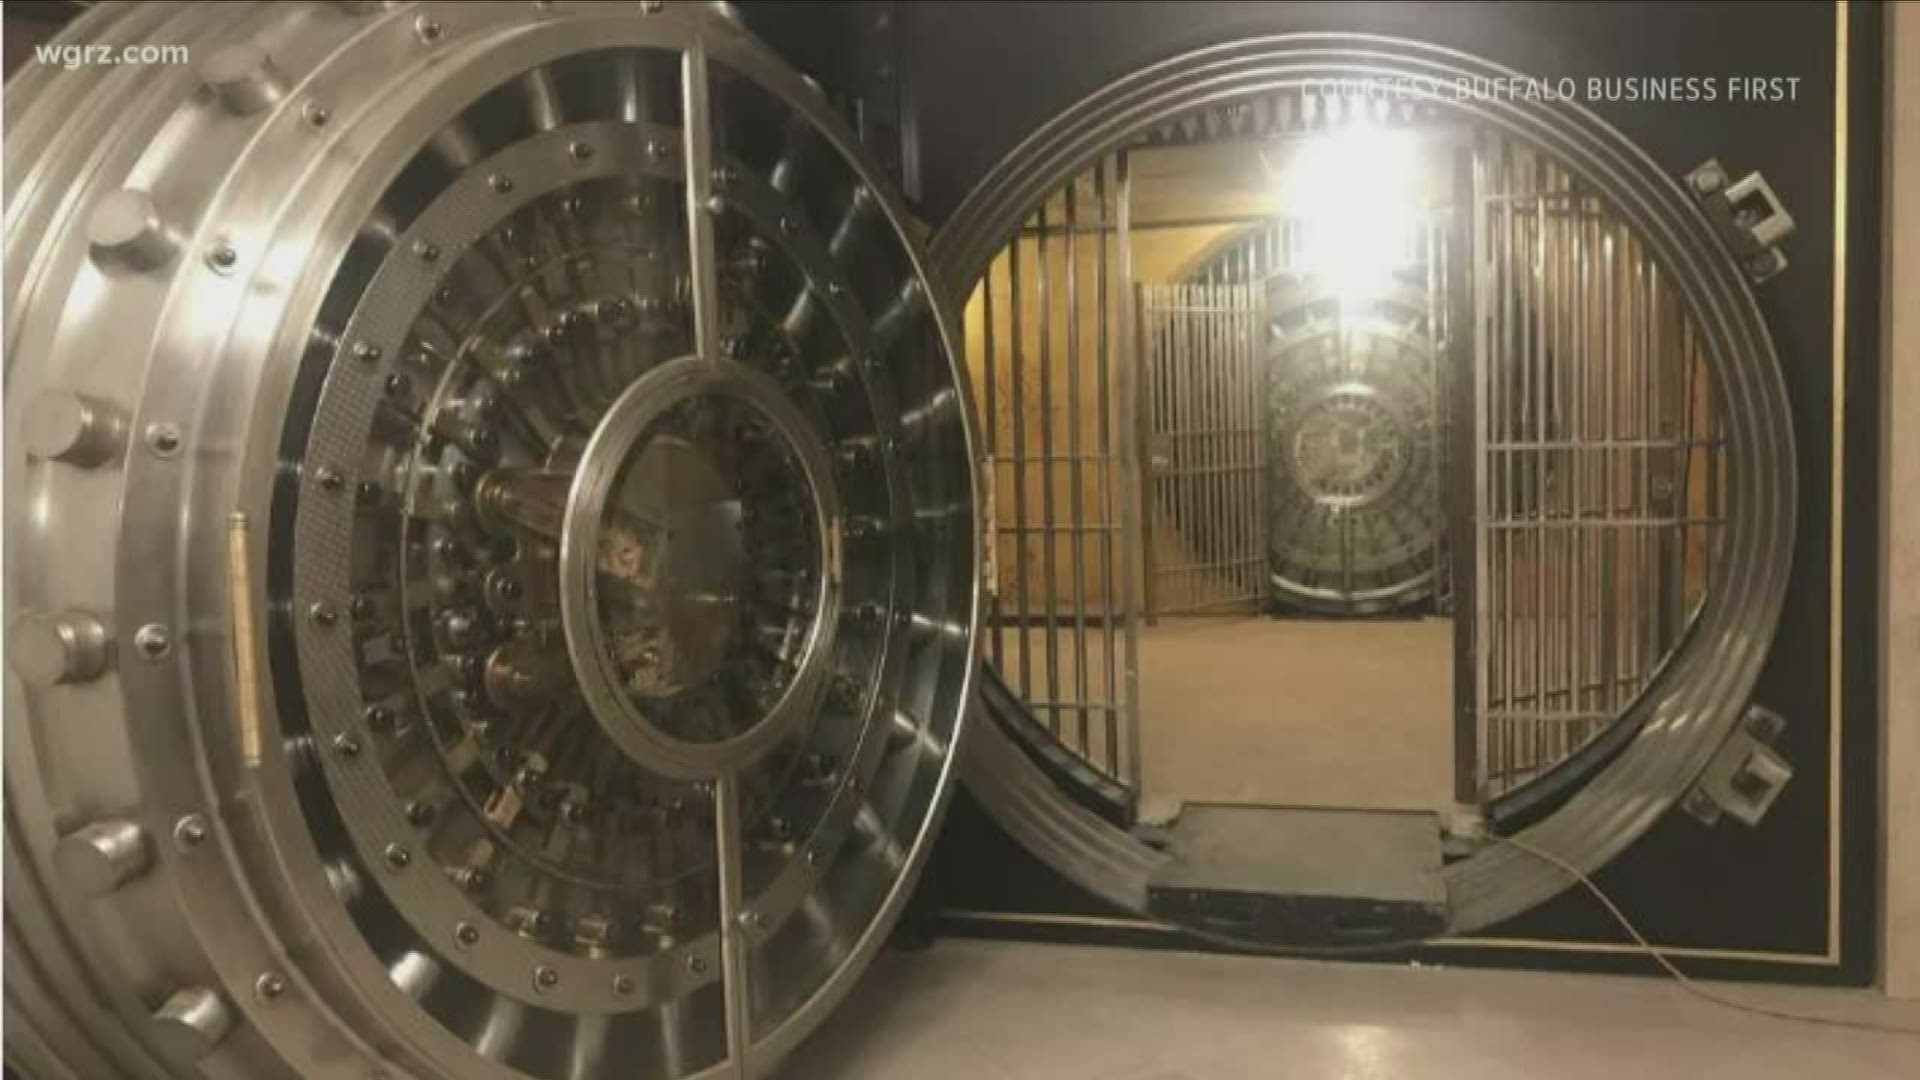 century-old bank vault inside the Marin Building at Main and Seneca into a restaurant called "Vault 237."